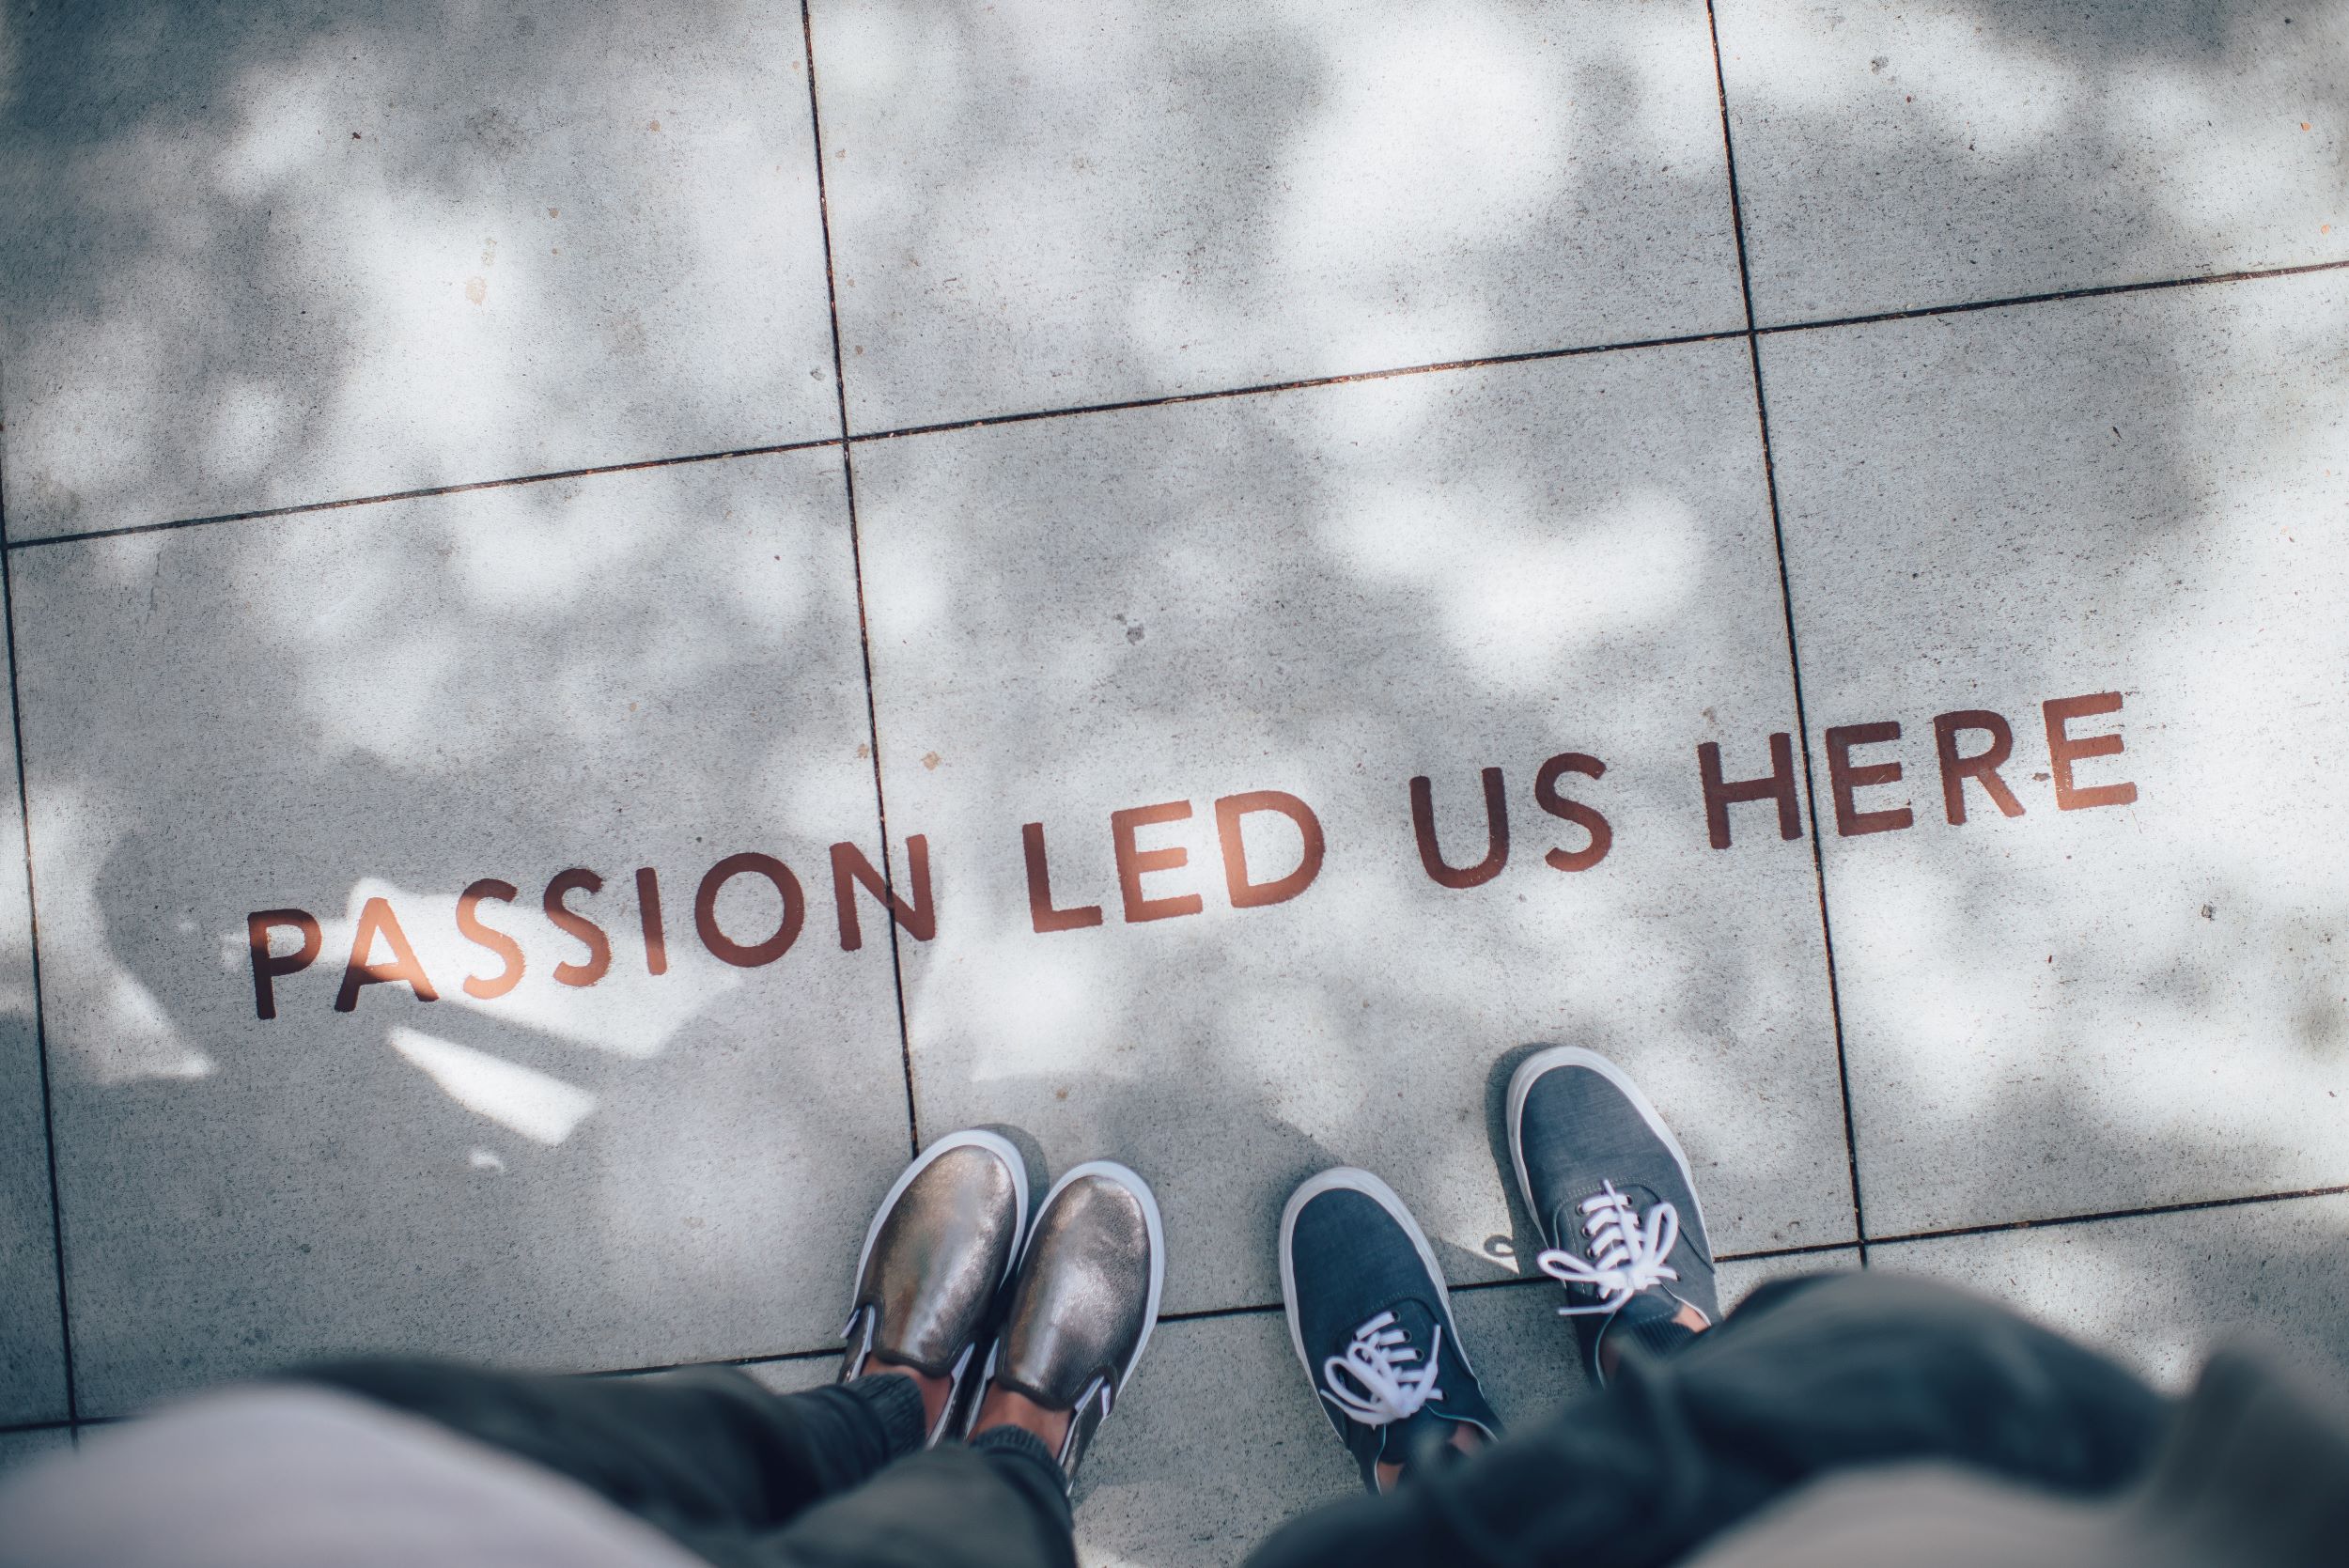 photo of sidewalk art that says "passion led us here" with two people's feet